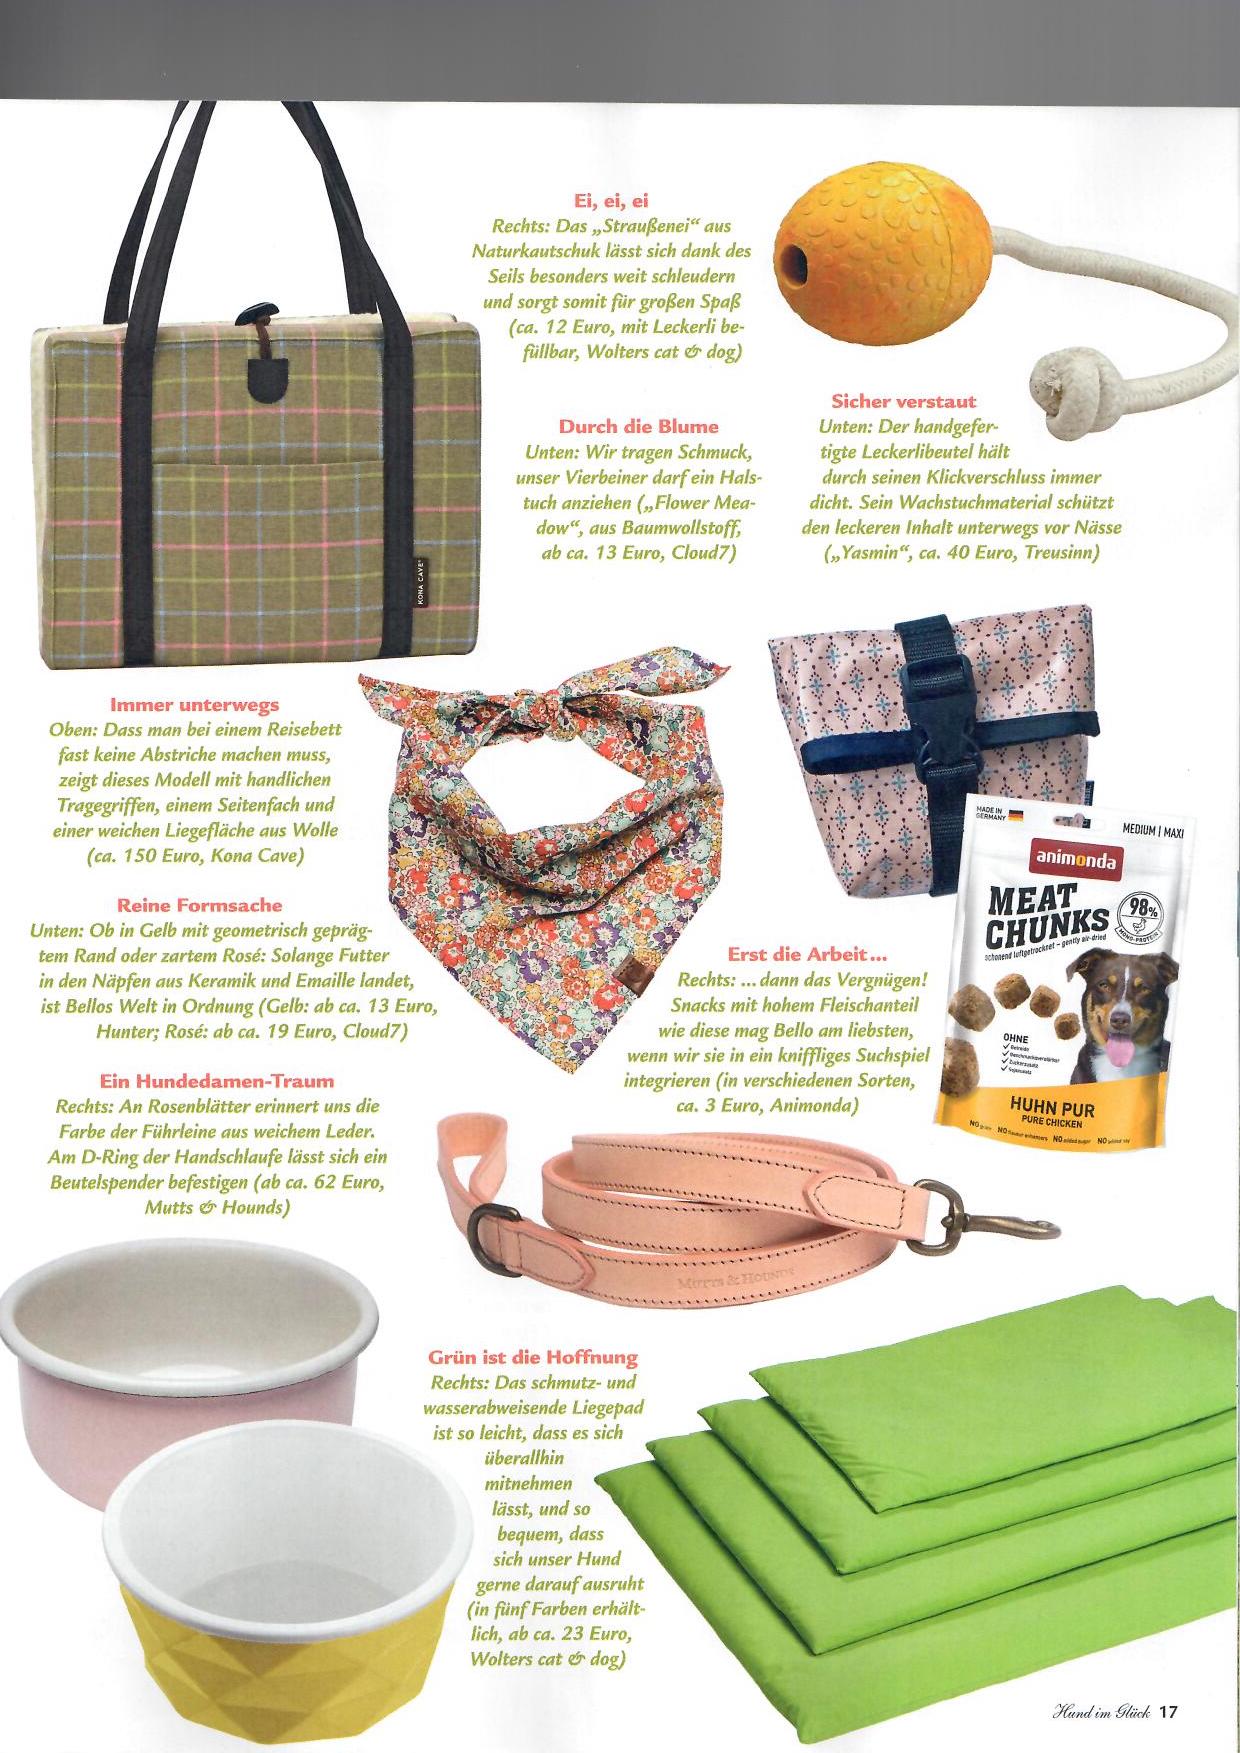 KONA CAVE® Travel Dog Bed in Spring Colors - Tan with pastel pink and blue - As seen in Hund Im Glück Magazine 